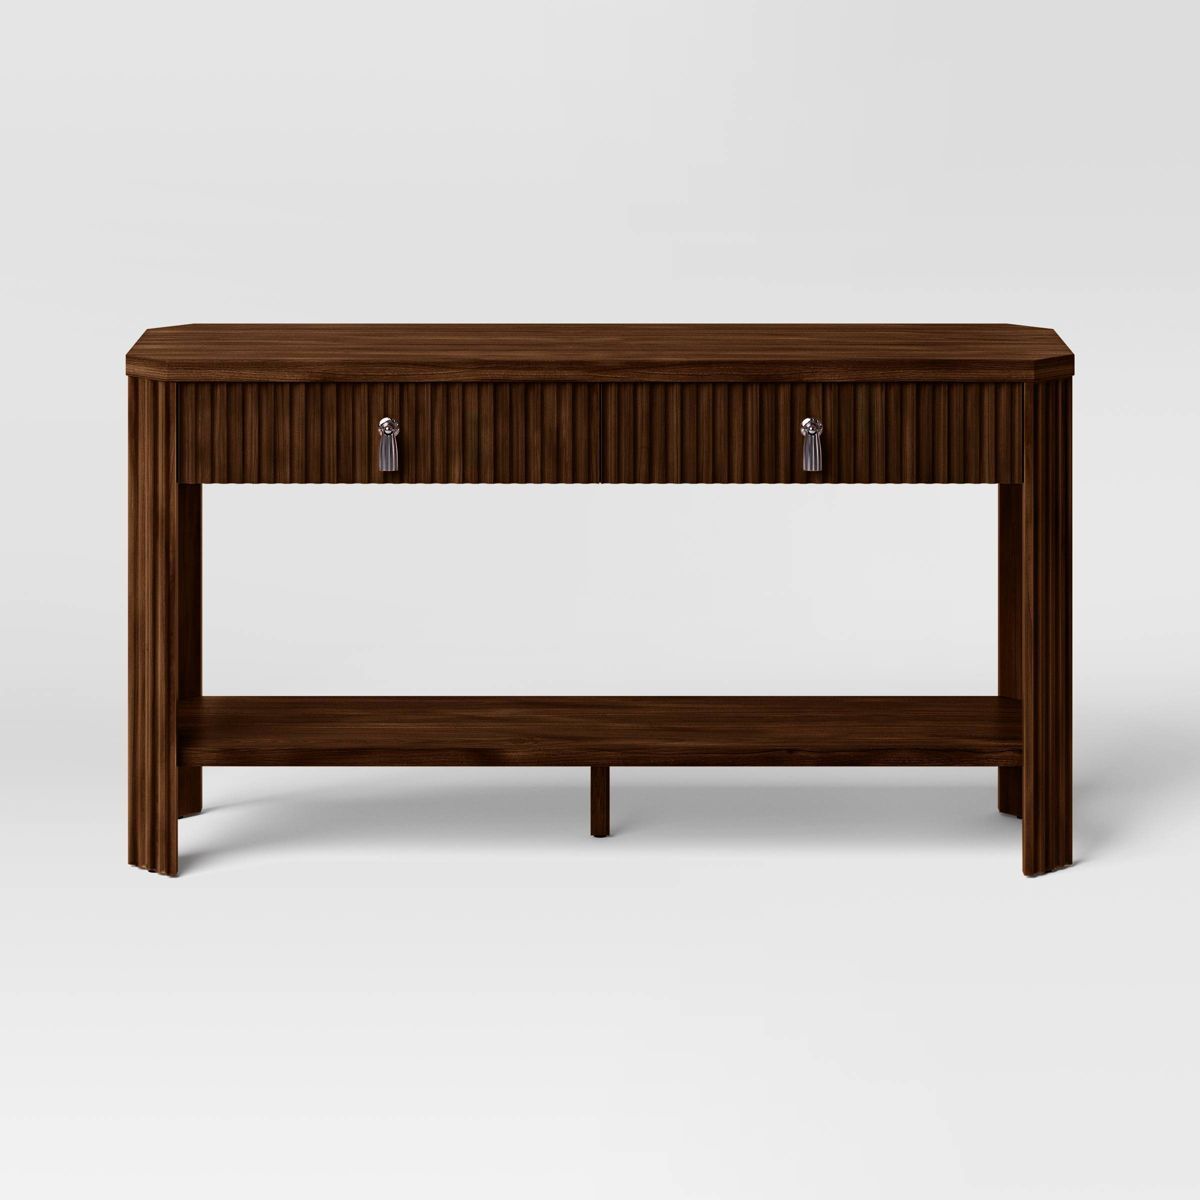 60" Laguna Nigel Fluted Wooden Console Table Brown - Threshold™ designed with Studio McGee | Target